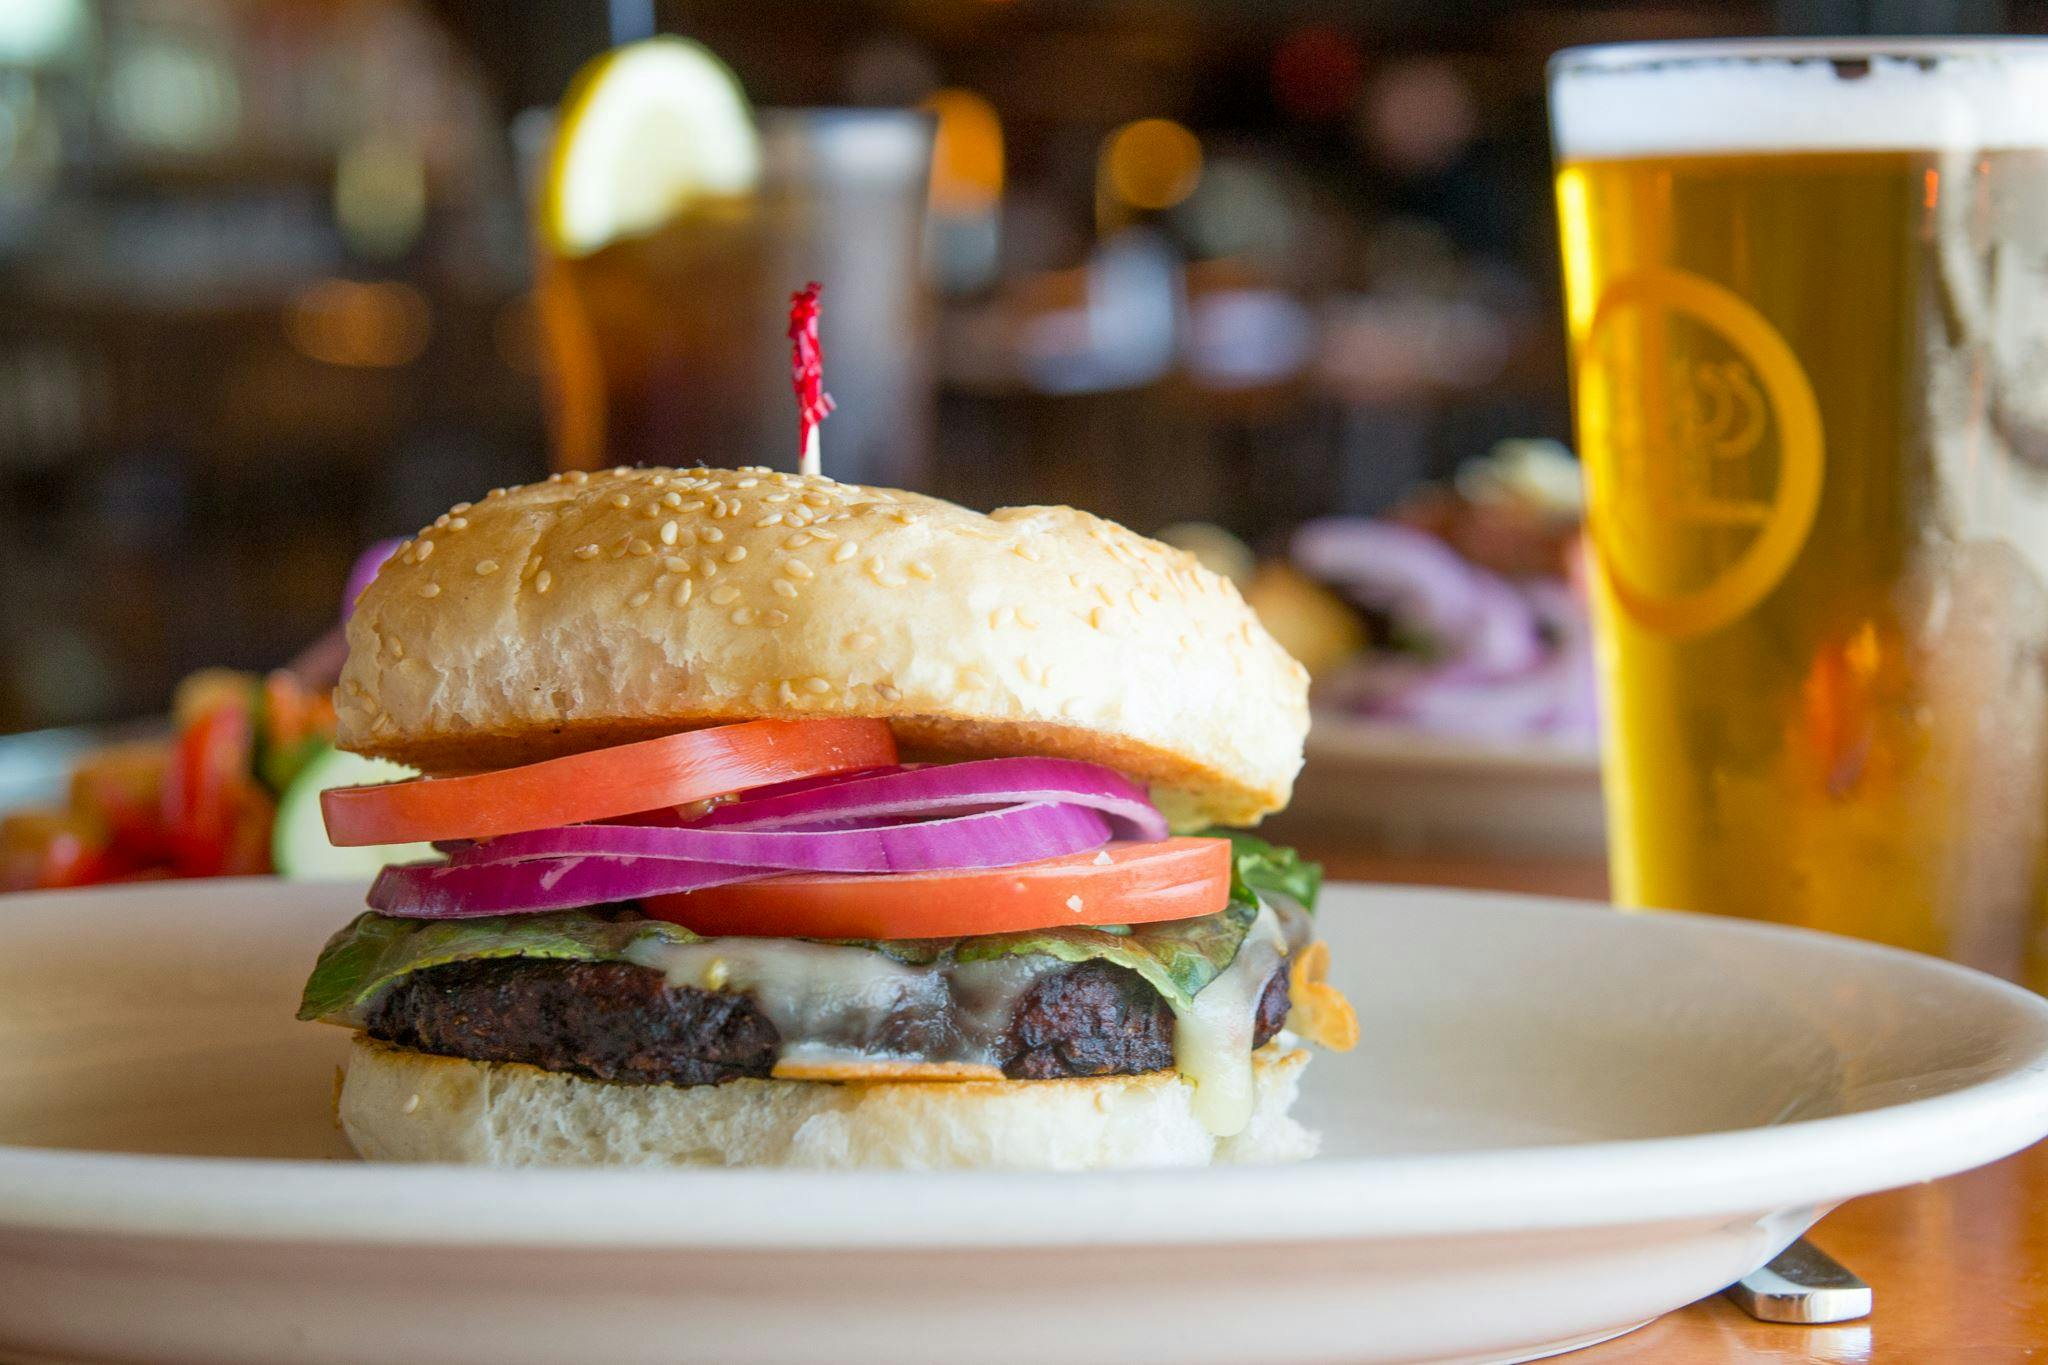 Start with a Black Bean Patty from The Brass Ring in Madison, WI